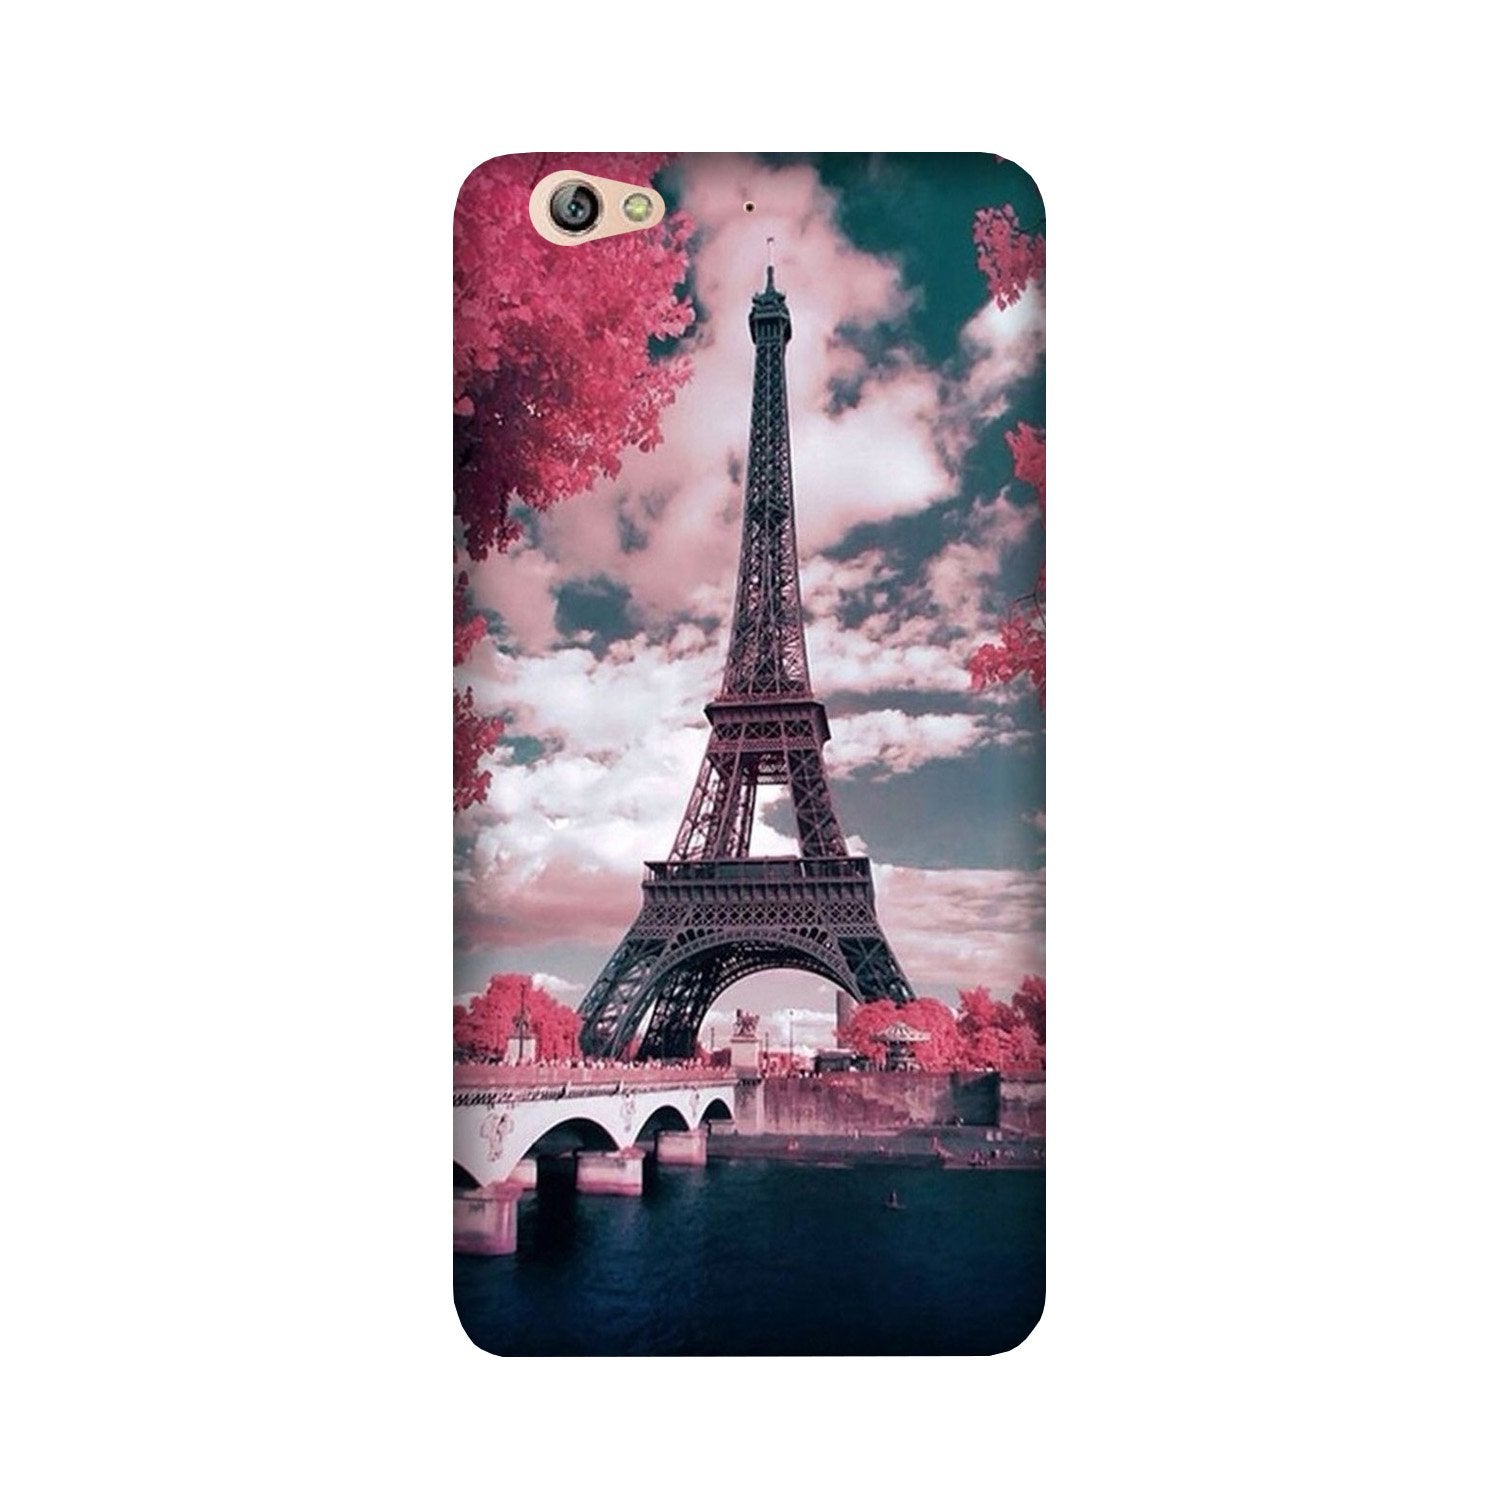 Eiffel Tower Case for Gionee S6(Design - 101)